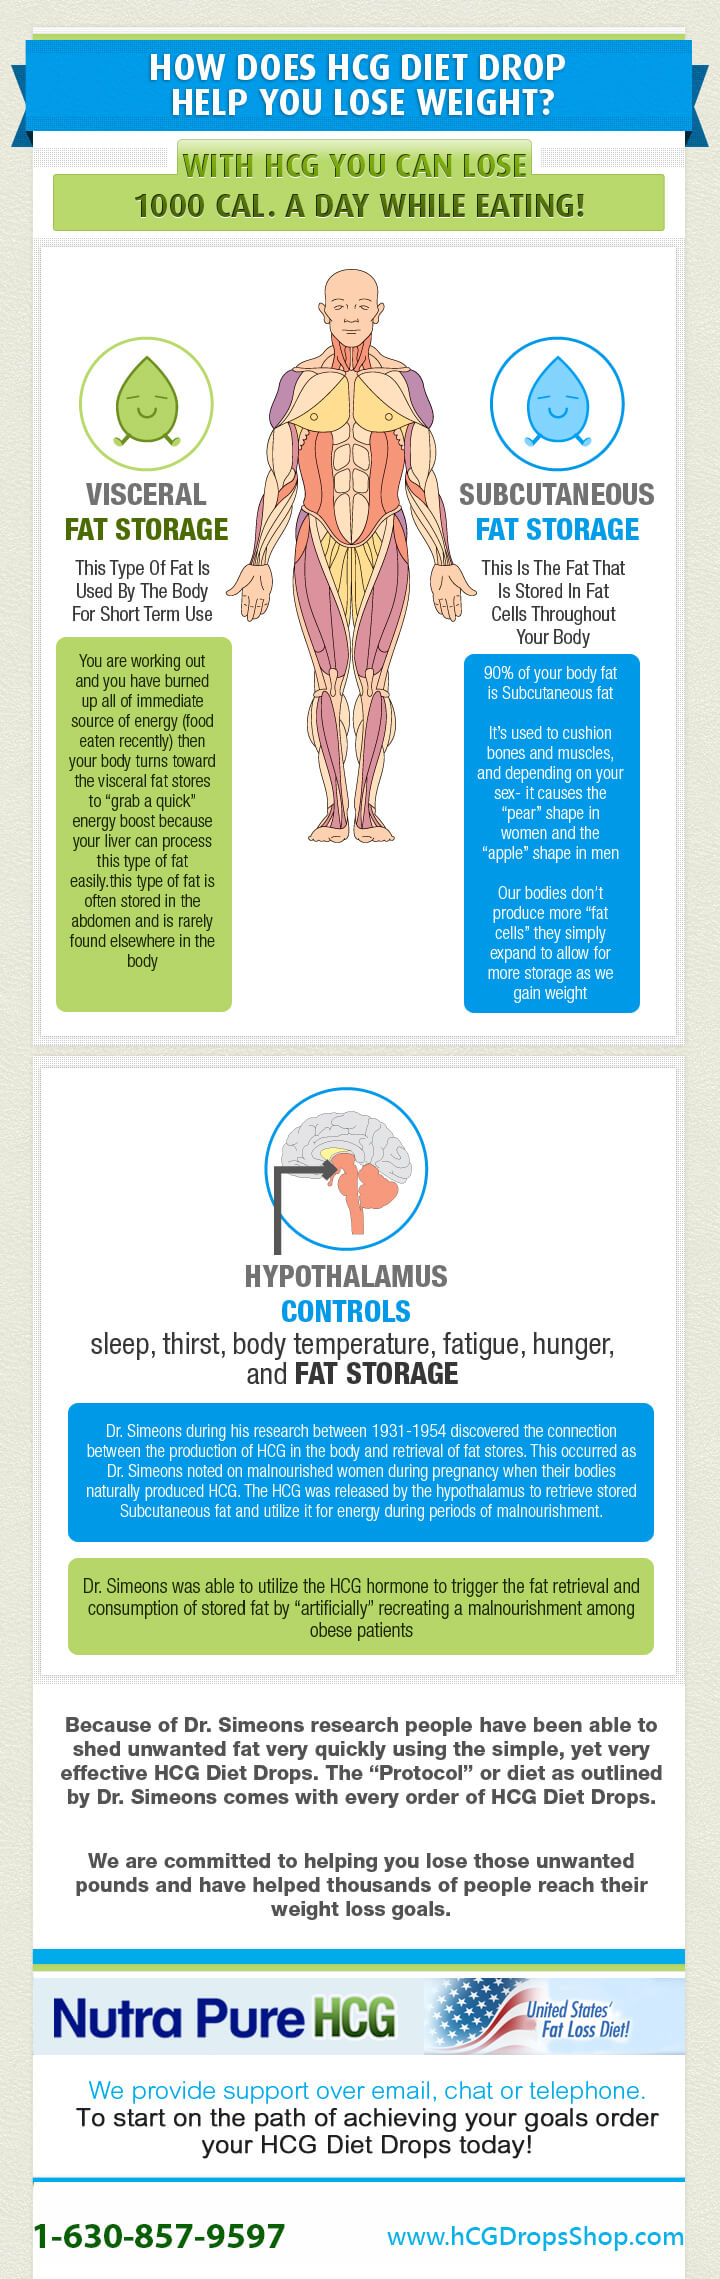 How HCG Helps Reducing Weight -Infographic